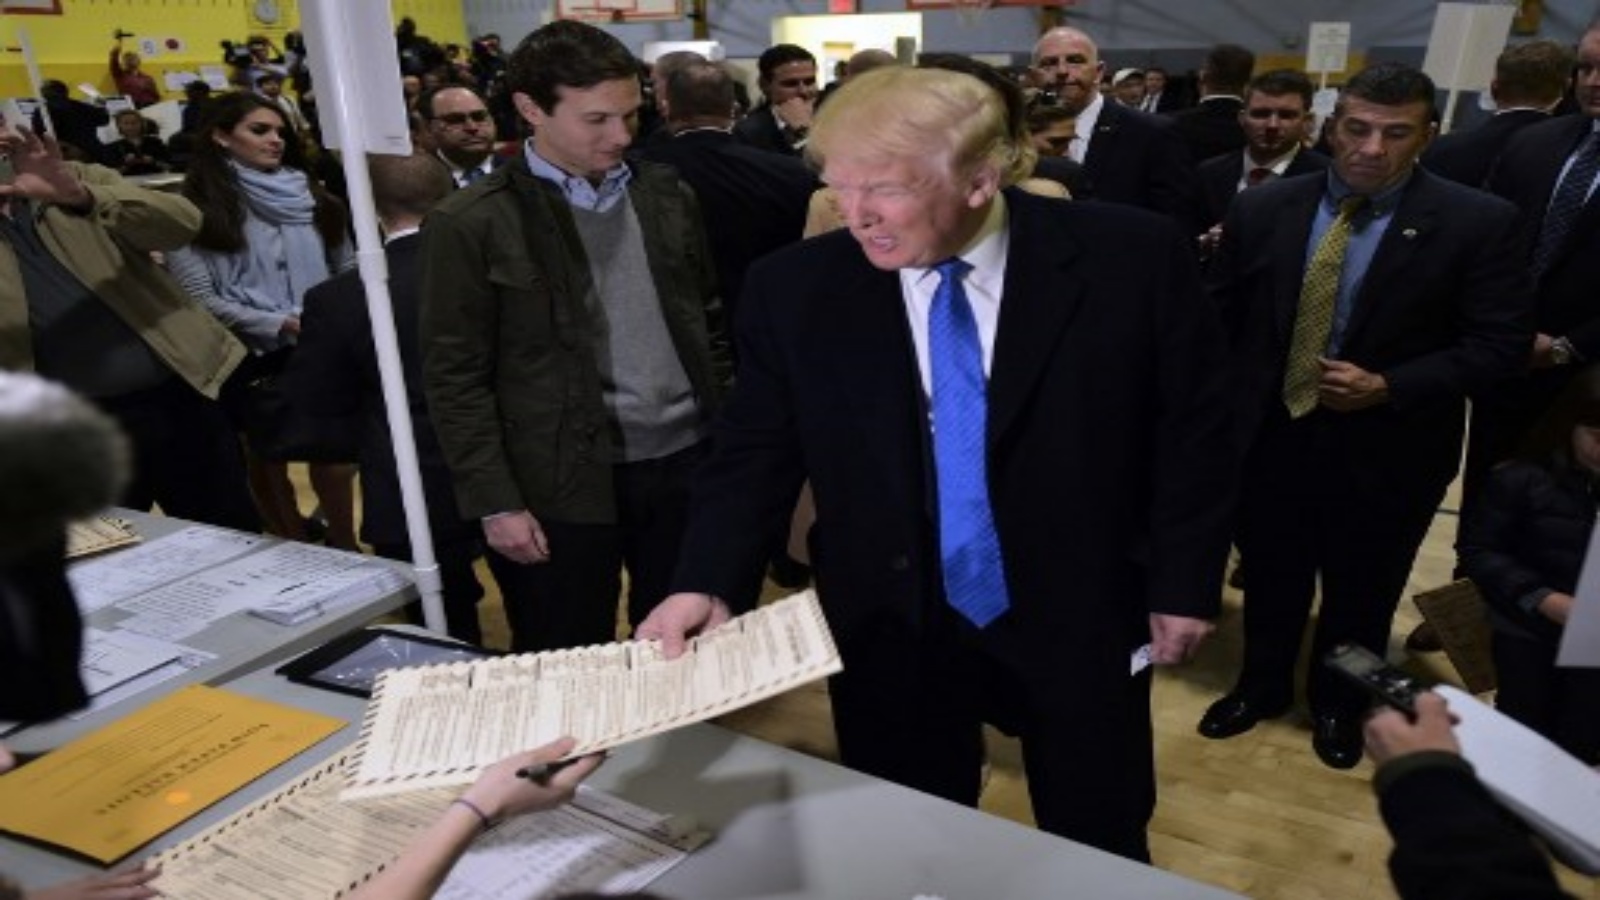 (FILES) In this file photo taken on November 8, 2016 Republican presidential nominee Donald Trump casts his ballot at a polling station in a school during the 2016 presidential elections in New York. - From insults and fearmongering to legal battles and budget cut threats, Donald Trump's love-hate relationship with his hometown of New York has descended into one of mutual contempt after four years in the White House. With his reelection bid just a week away, the Republican nominee is maintaining his regular attacks on the Democratic bastion, even though he has virtually no chance of winning there. (Photo by MANDEL NGAN / AFP)